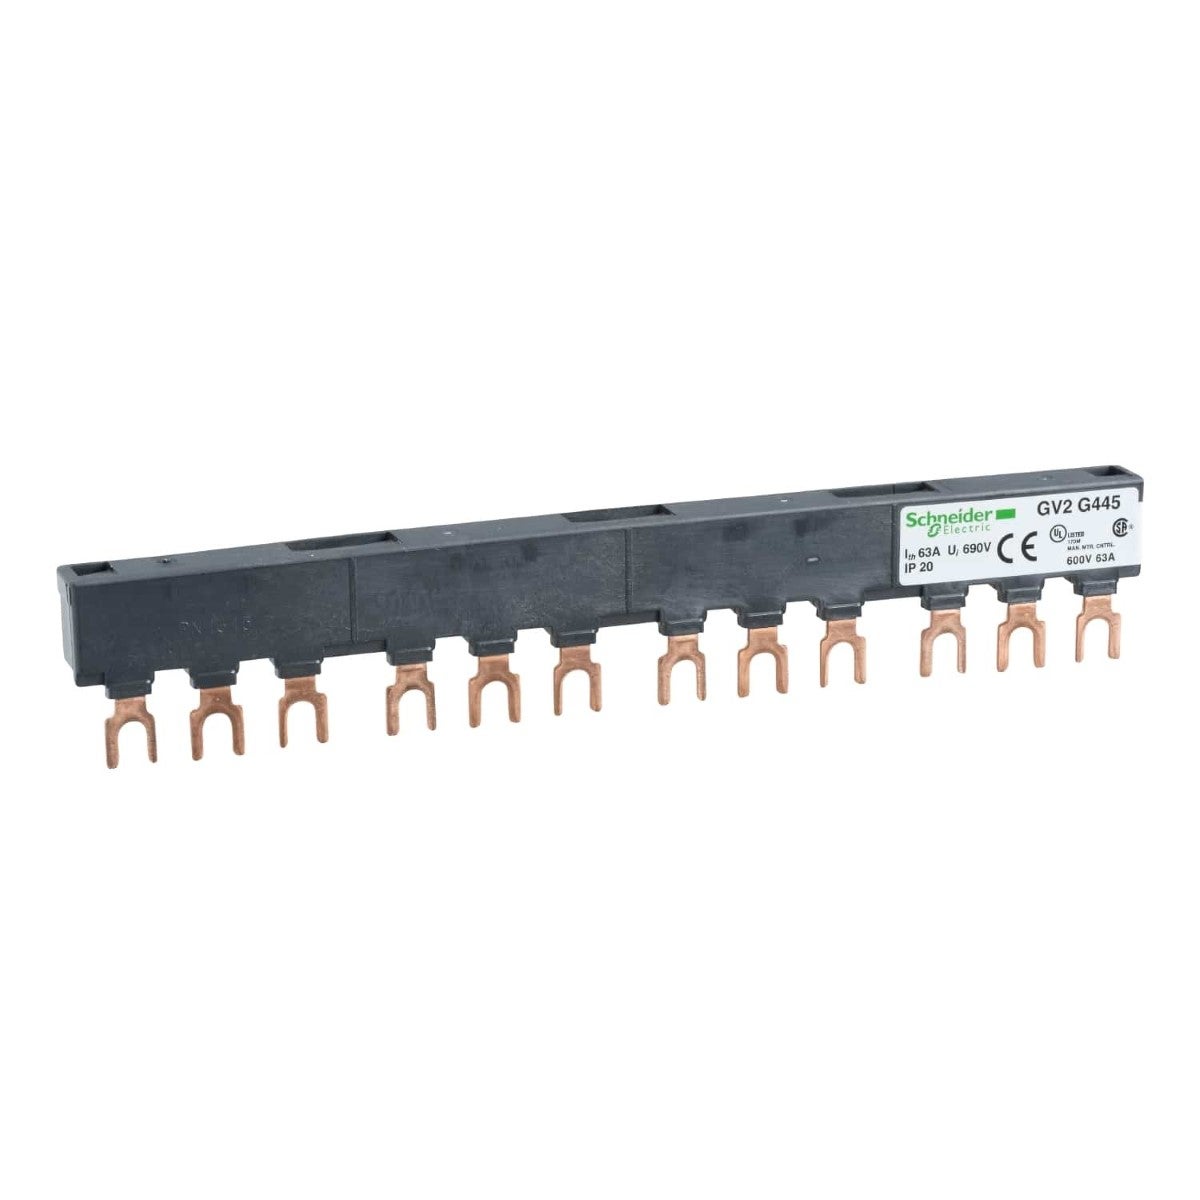 Linergy FT, Comb busbar, 63A, 4 tap-offs, 45mm pitch